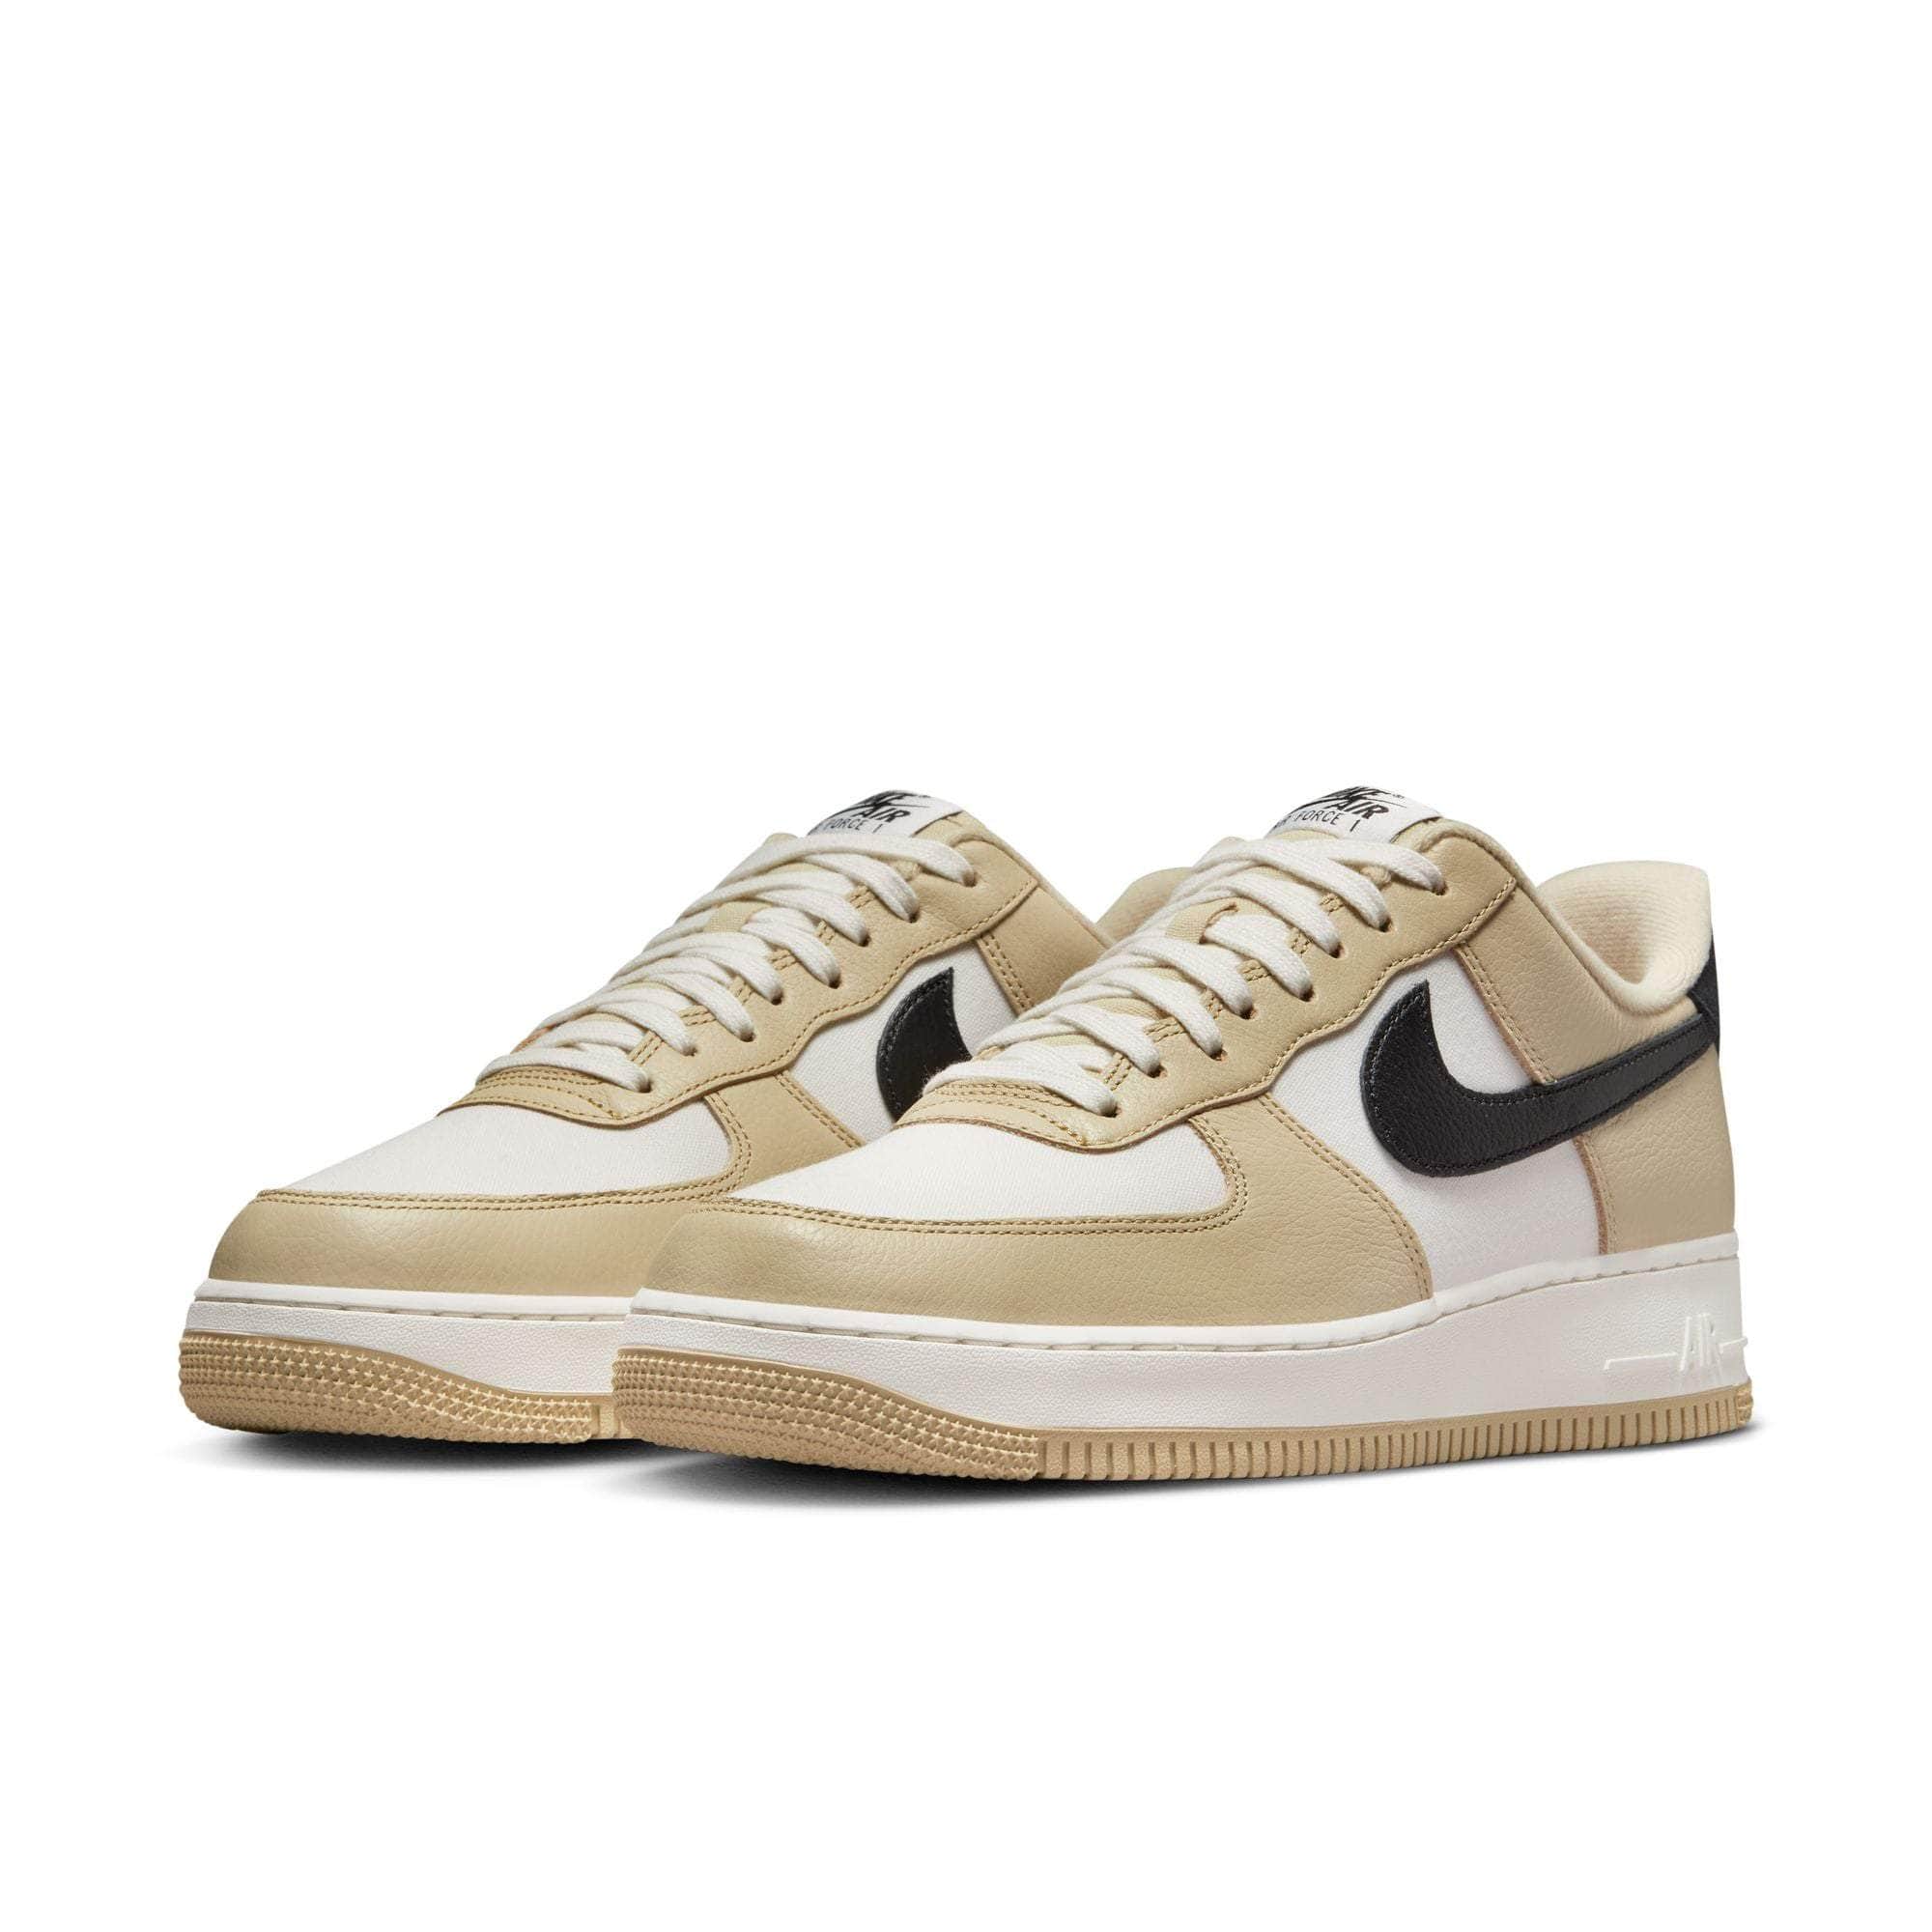 Nike Air Force 1 Low LX 'Team Gold' - Men's - GBNY